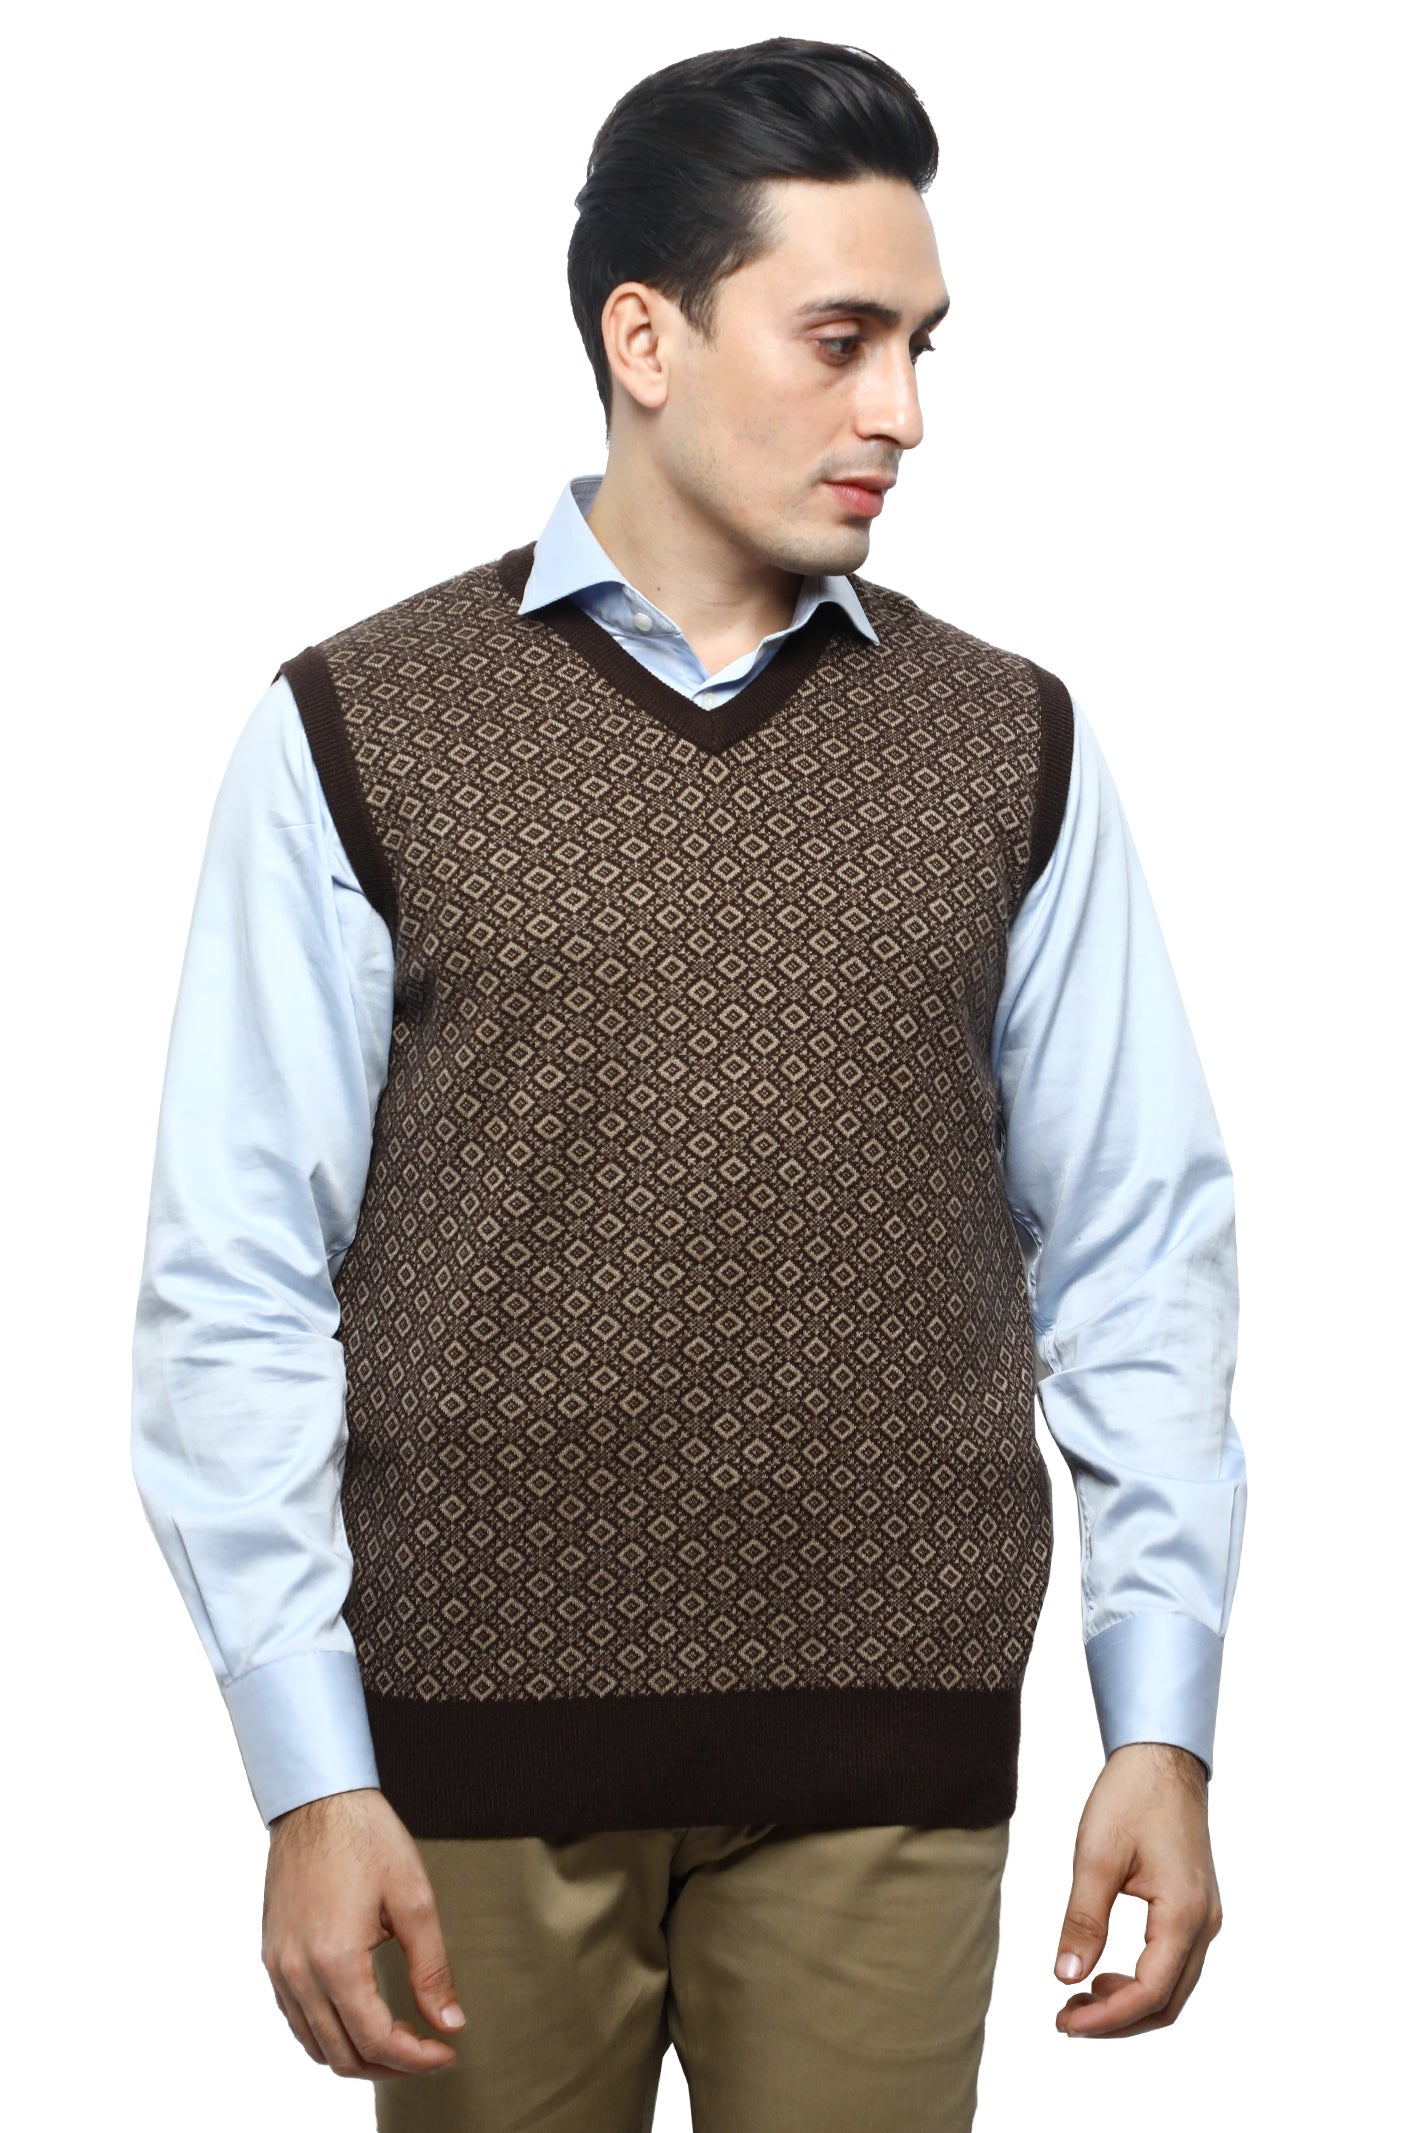 Gents Sweater (Sleeveless) In Brown SKU: SA562-BROWN - Diners